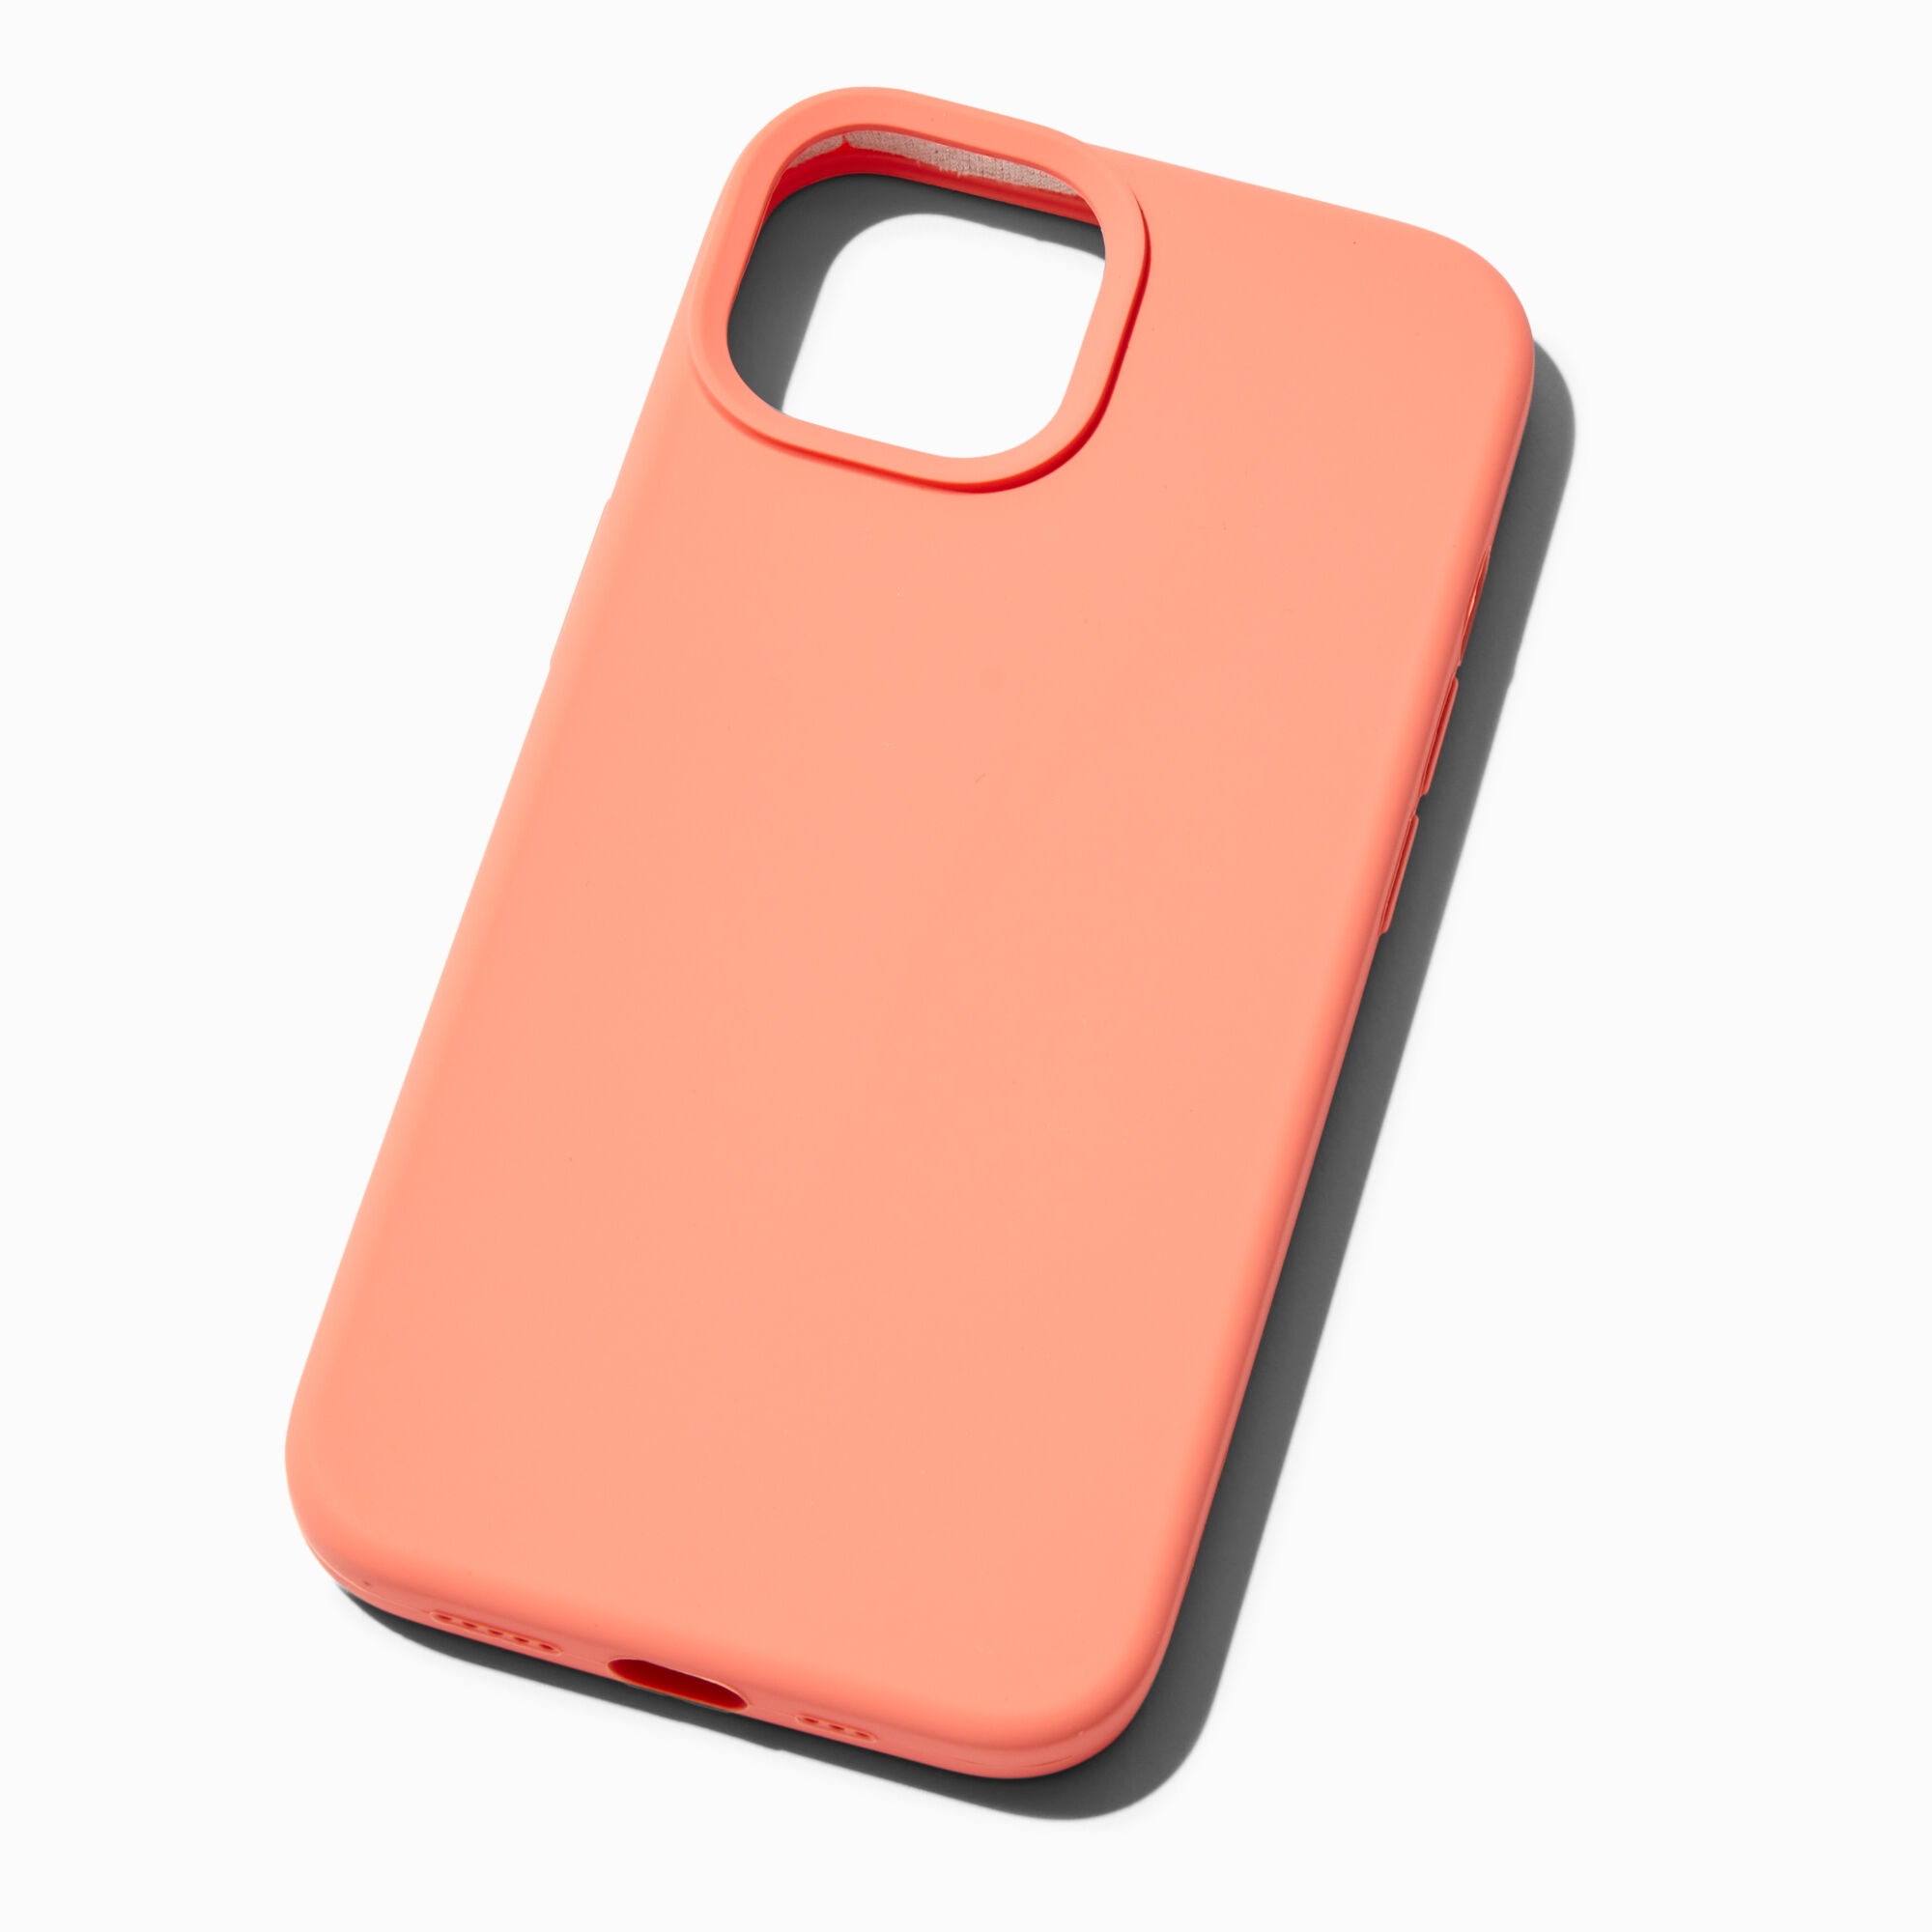 View Claires Solid Silicone Phone Case Fits Iphone 1314 Pro Coral information